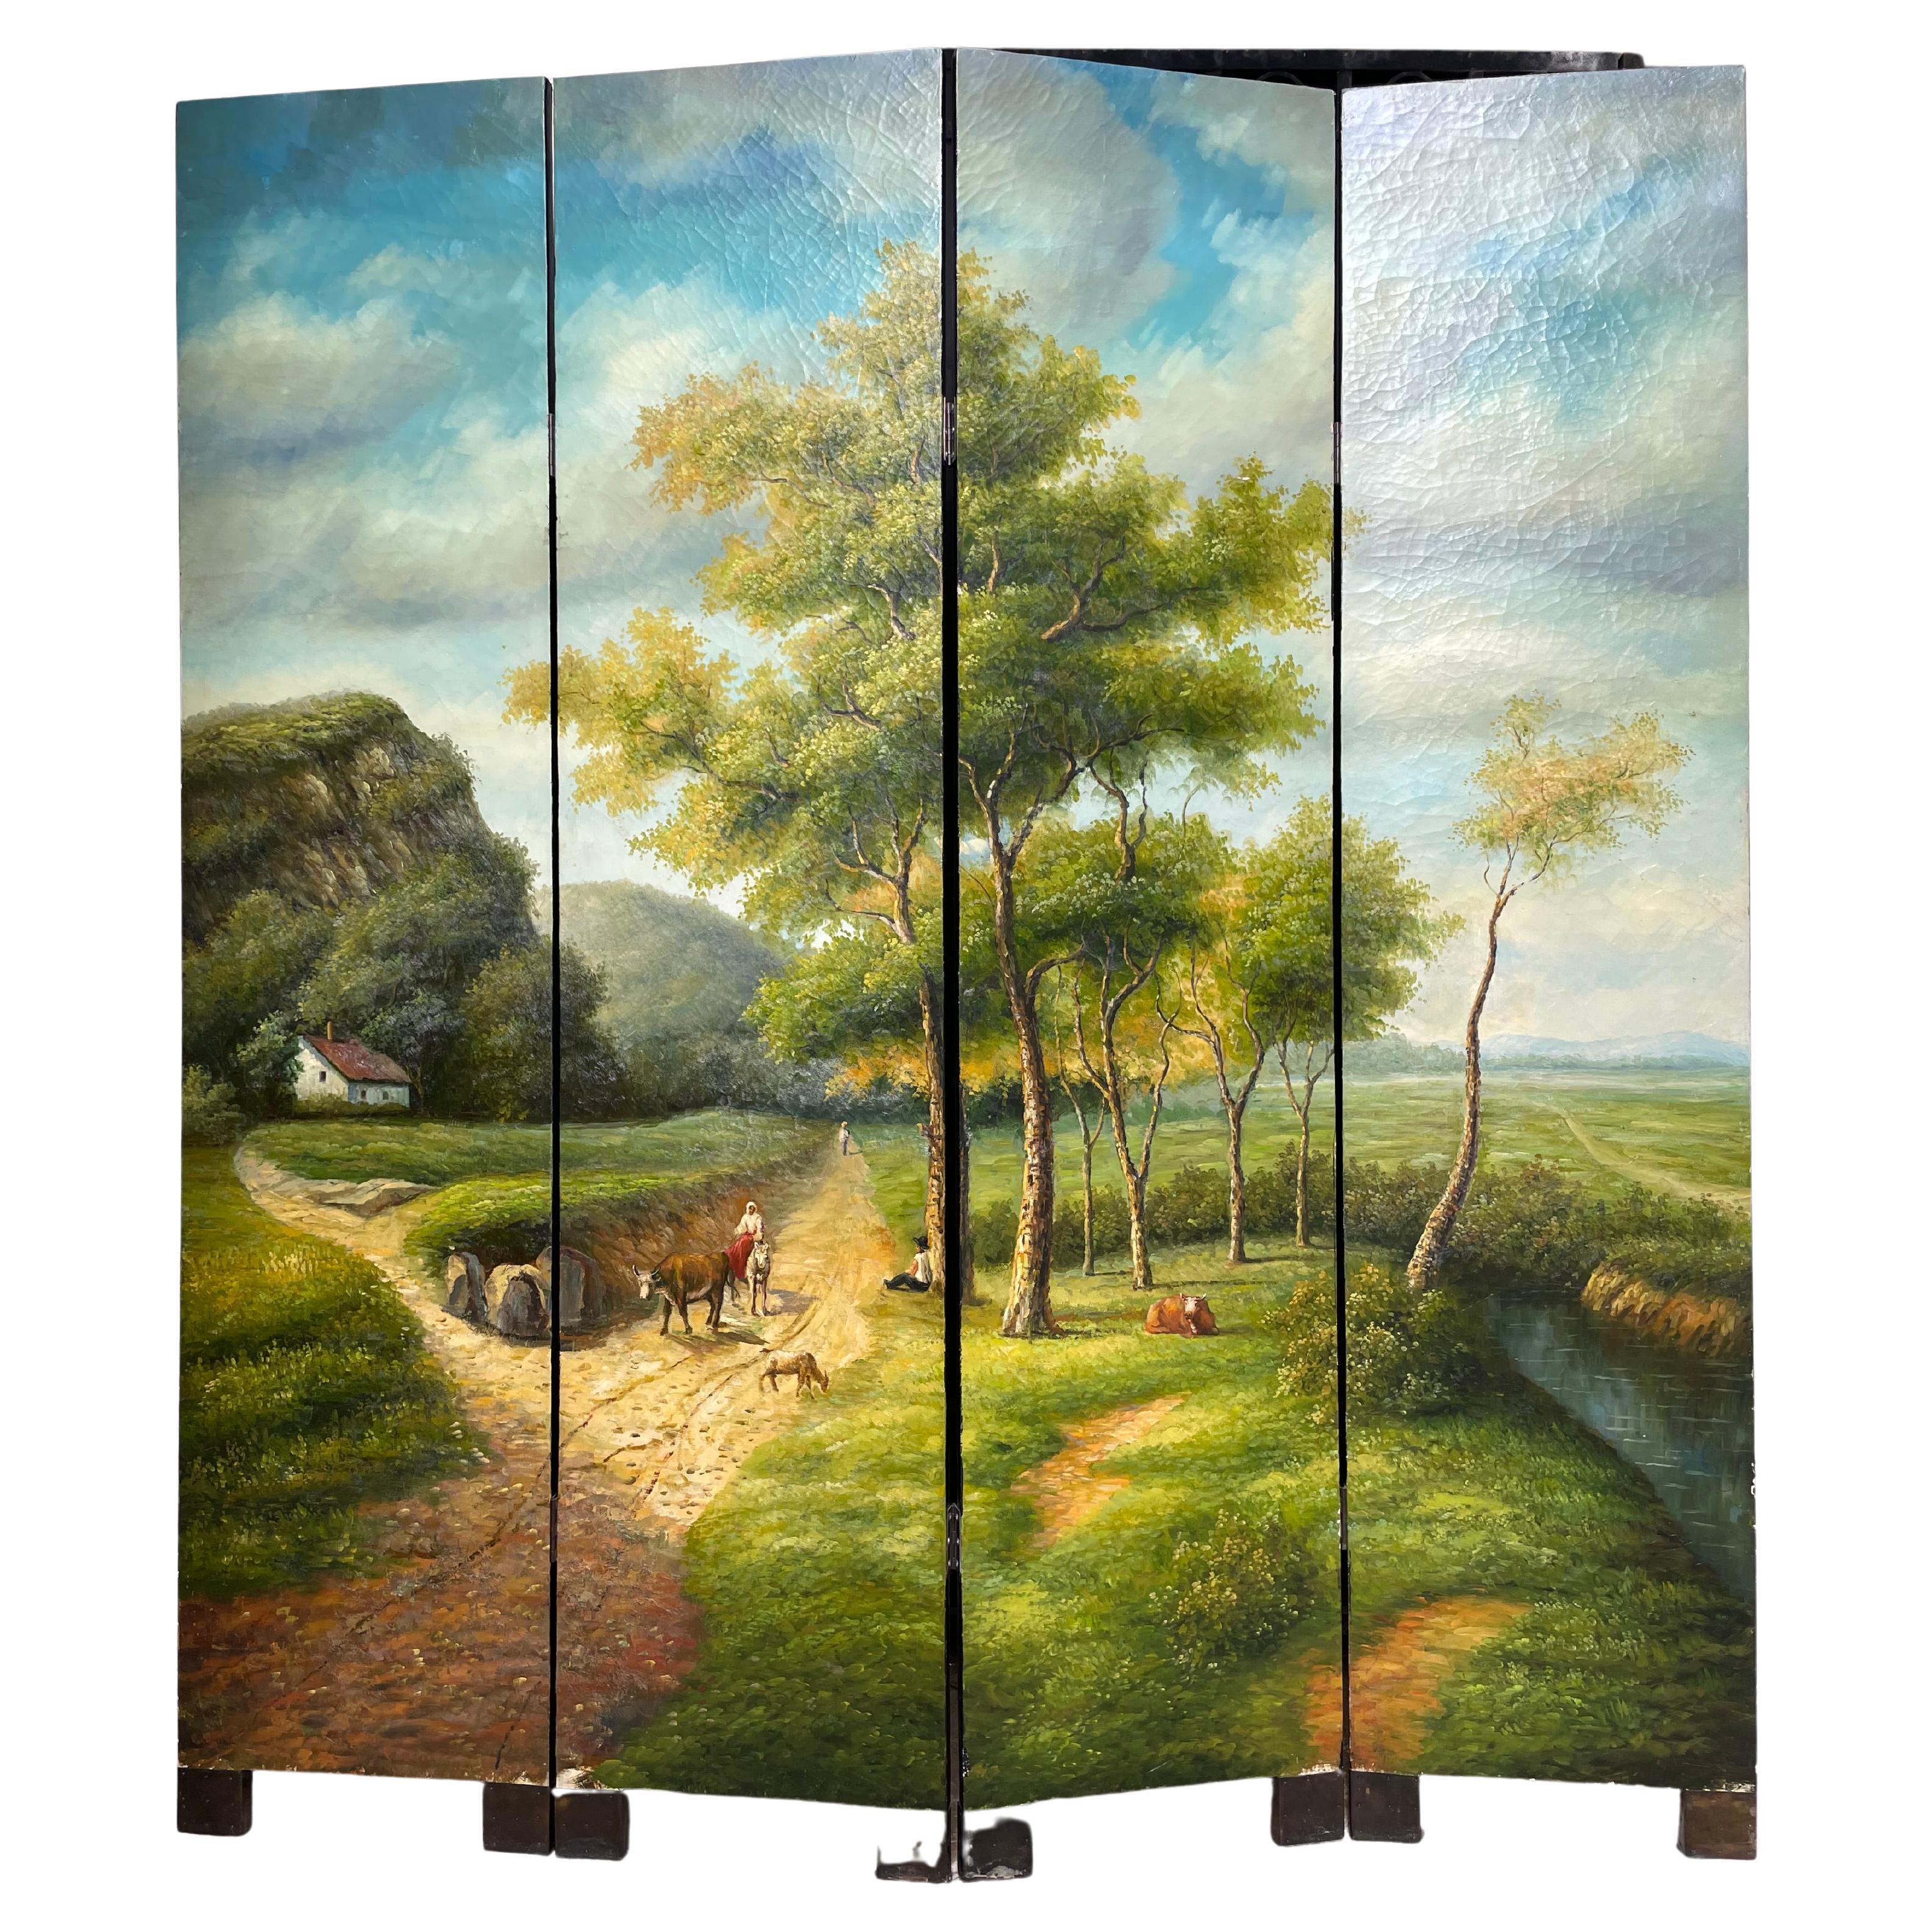 Four-leaf wooden screen. Oil on canvas represents a French countryside scene in the 19th century. Magnificent cloudy blue sky and green landscape, traditional house, animals, and a farmer are the delicately painted elements of this extremely bright